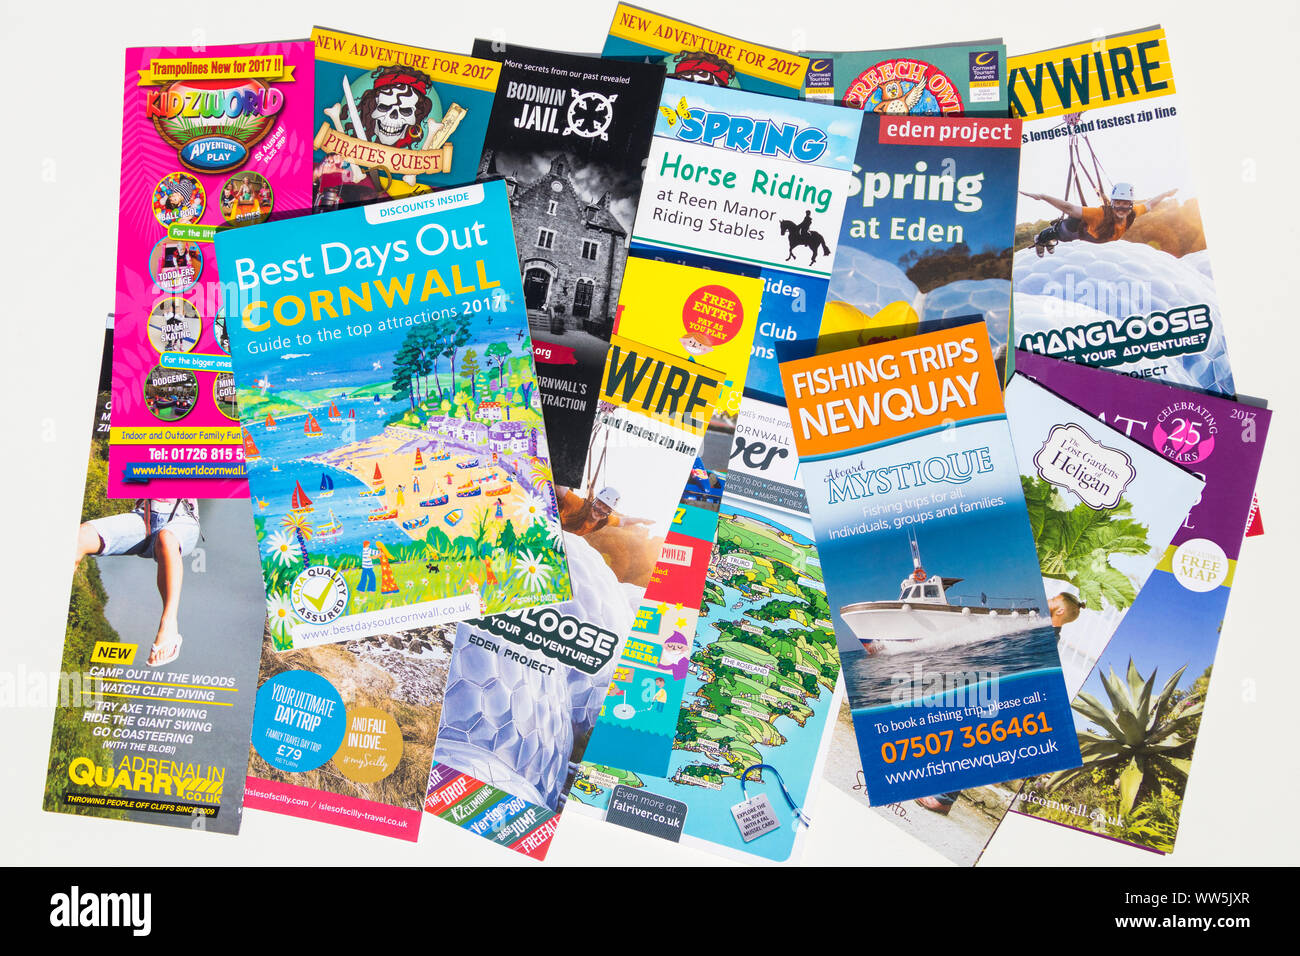 Best days out cornwall leaflets, tourist board promotional material, cornwall, uk Stock Photo